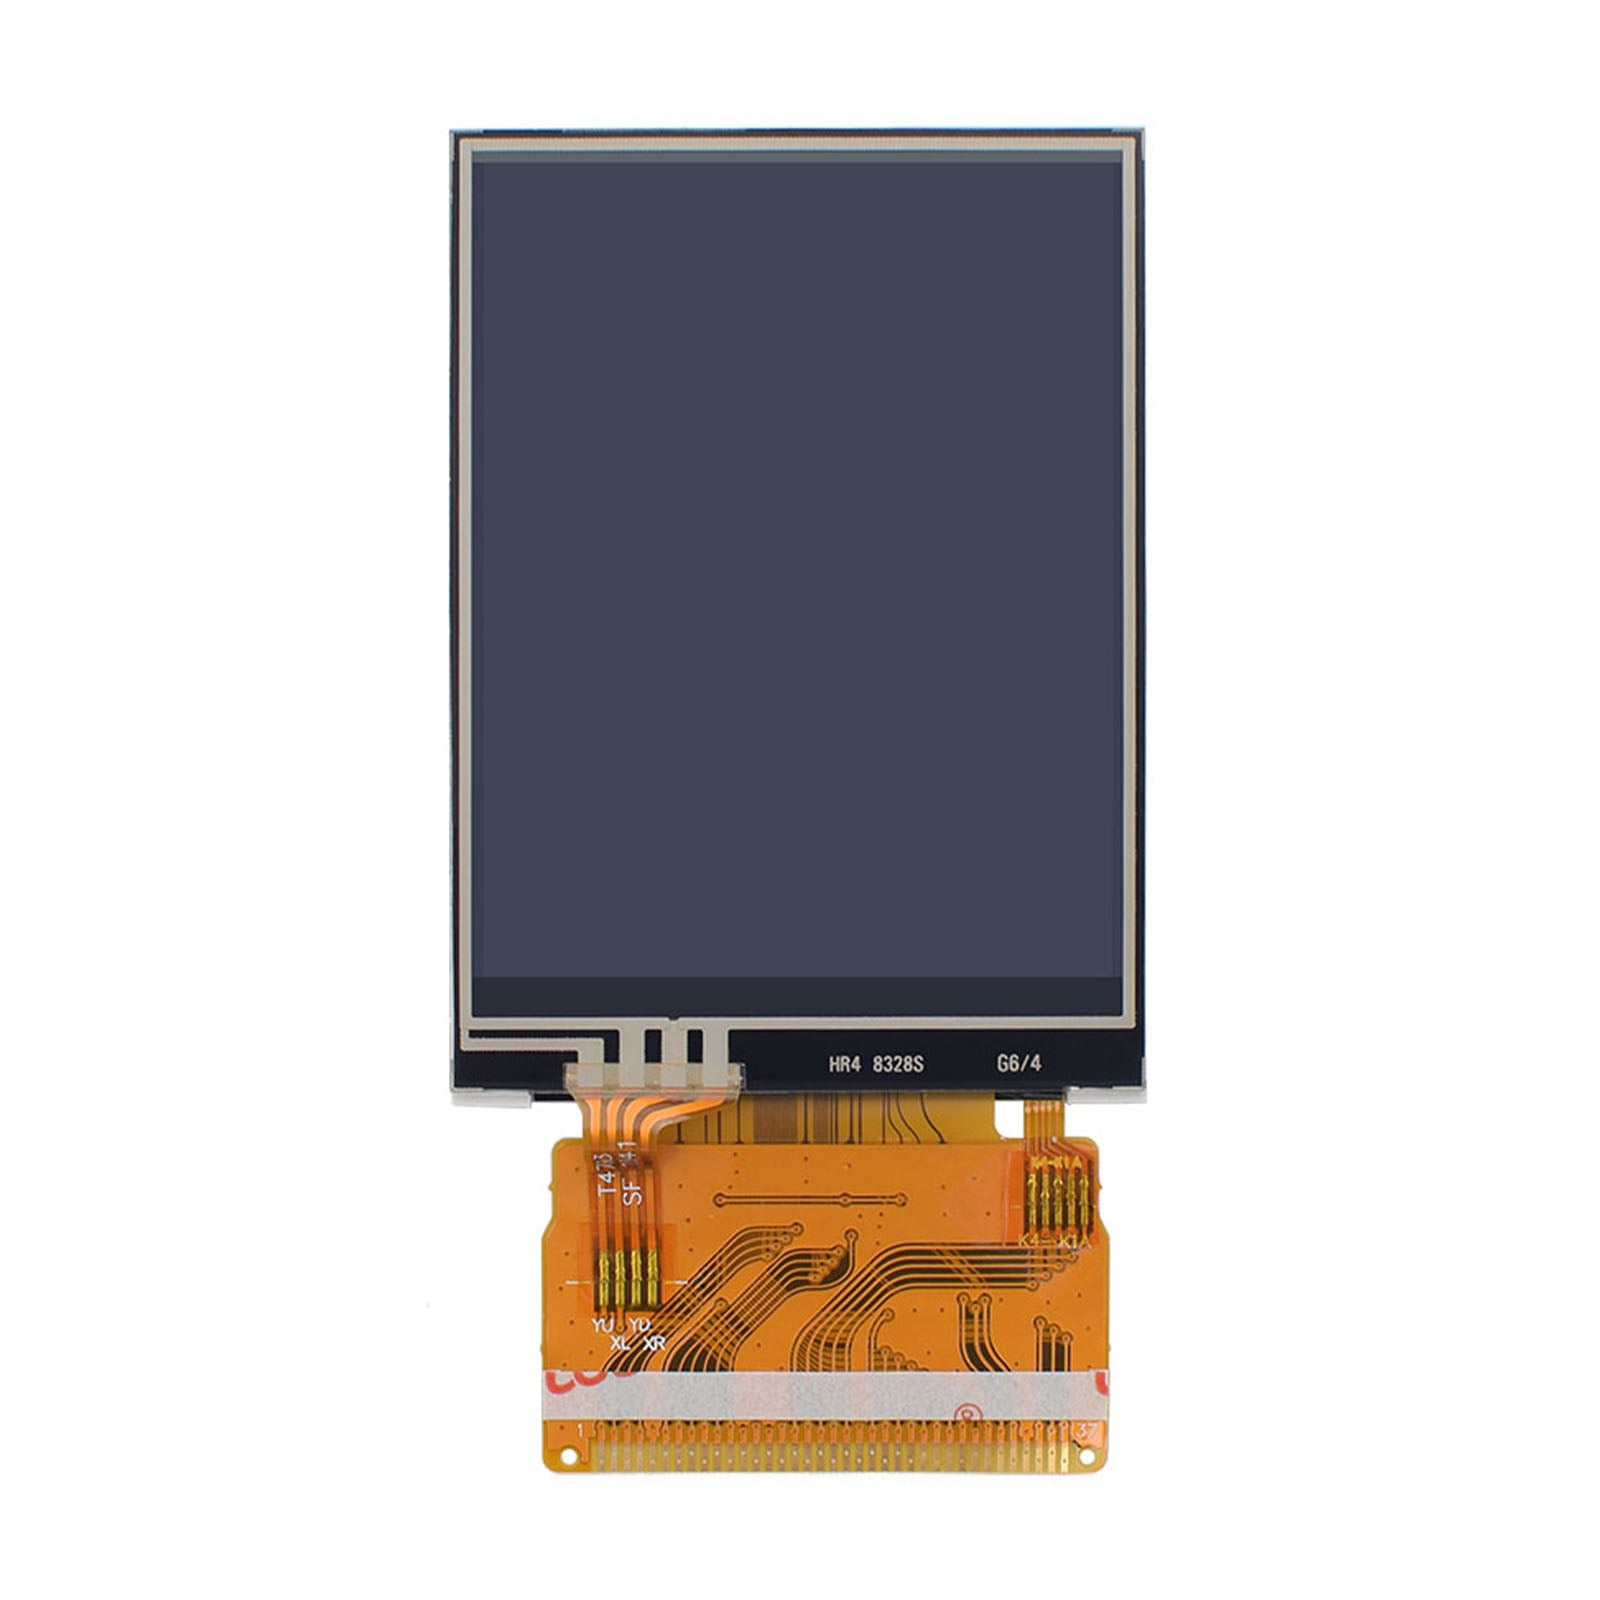 DisplayModule 2.4" 240x320 TFT LCD Display Panel With Resistive Touch - MCU